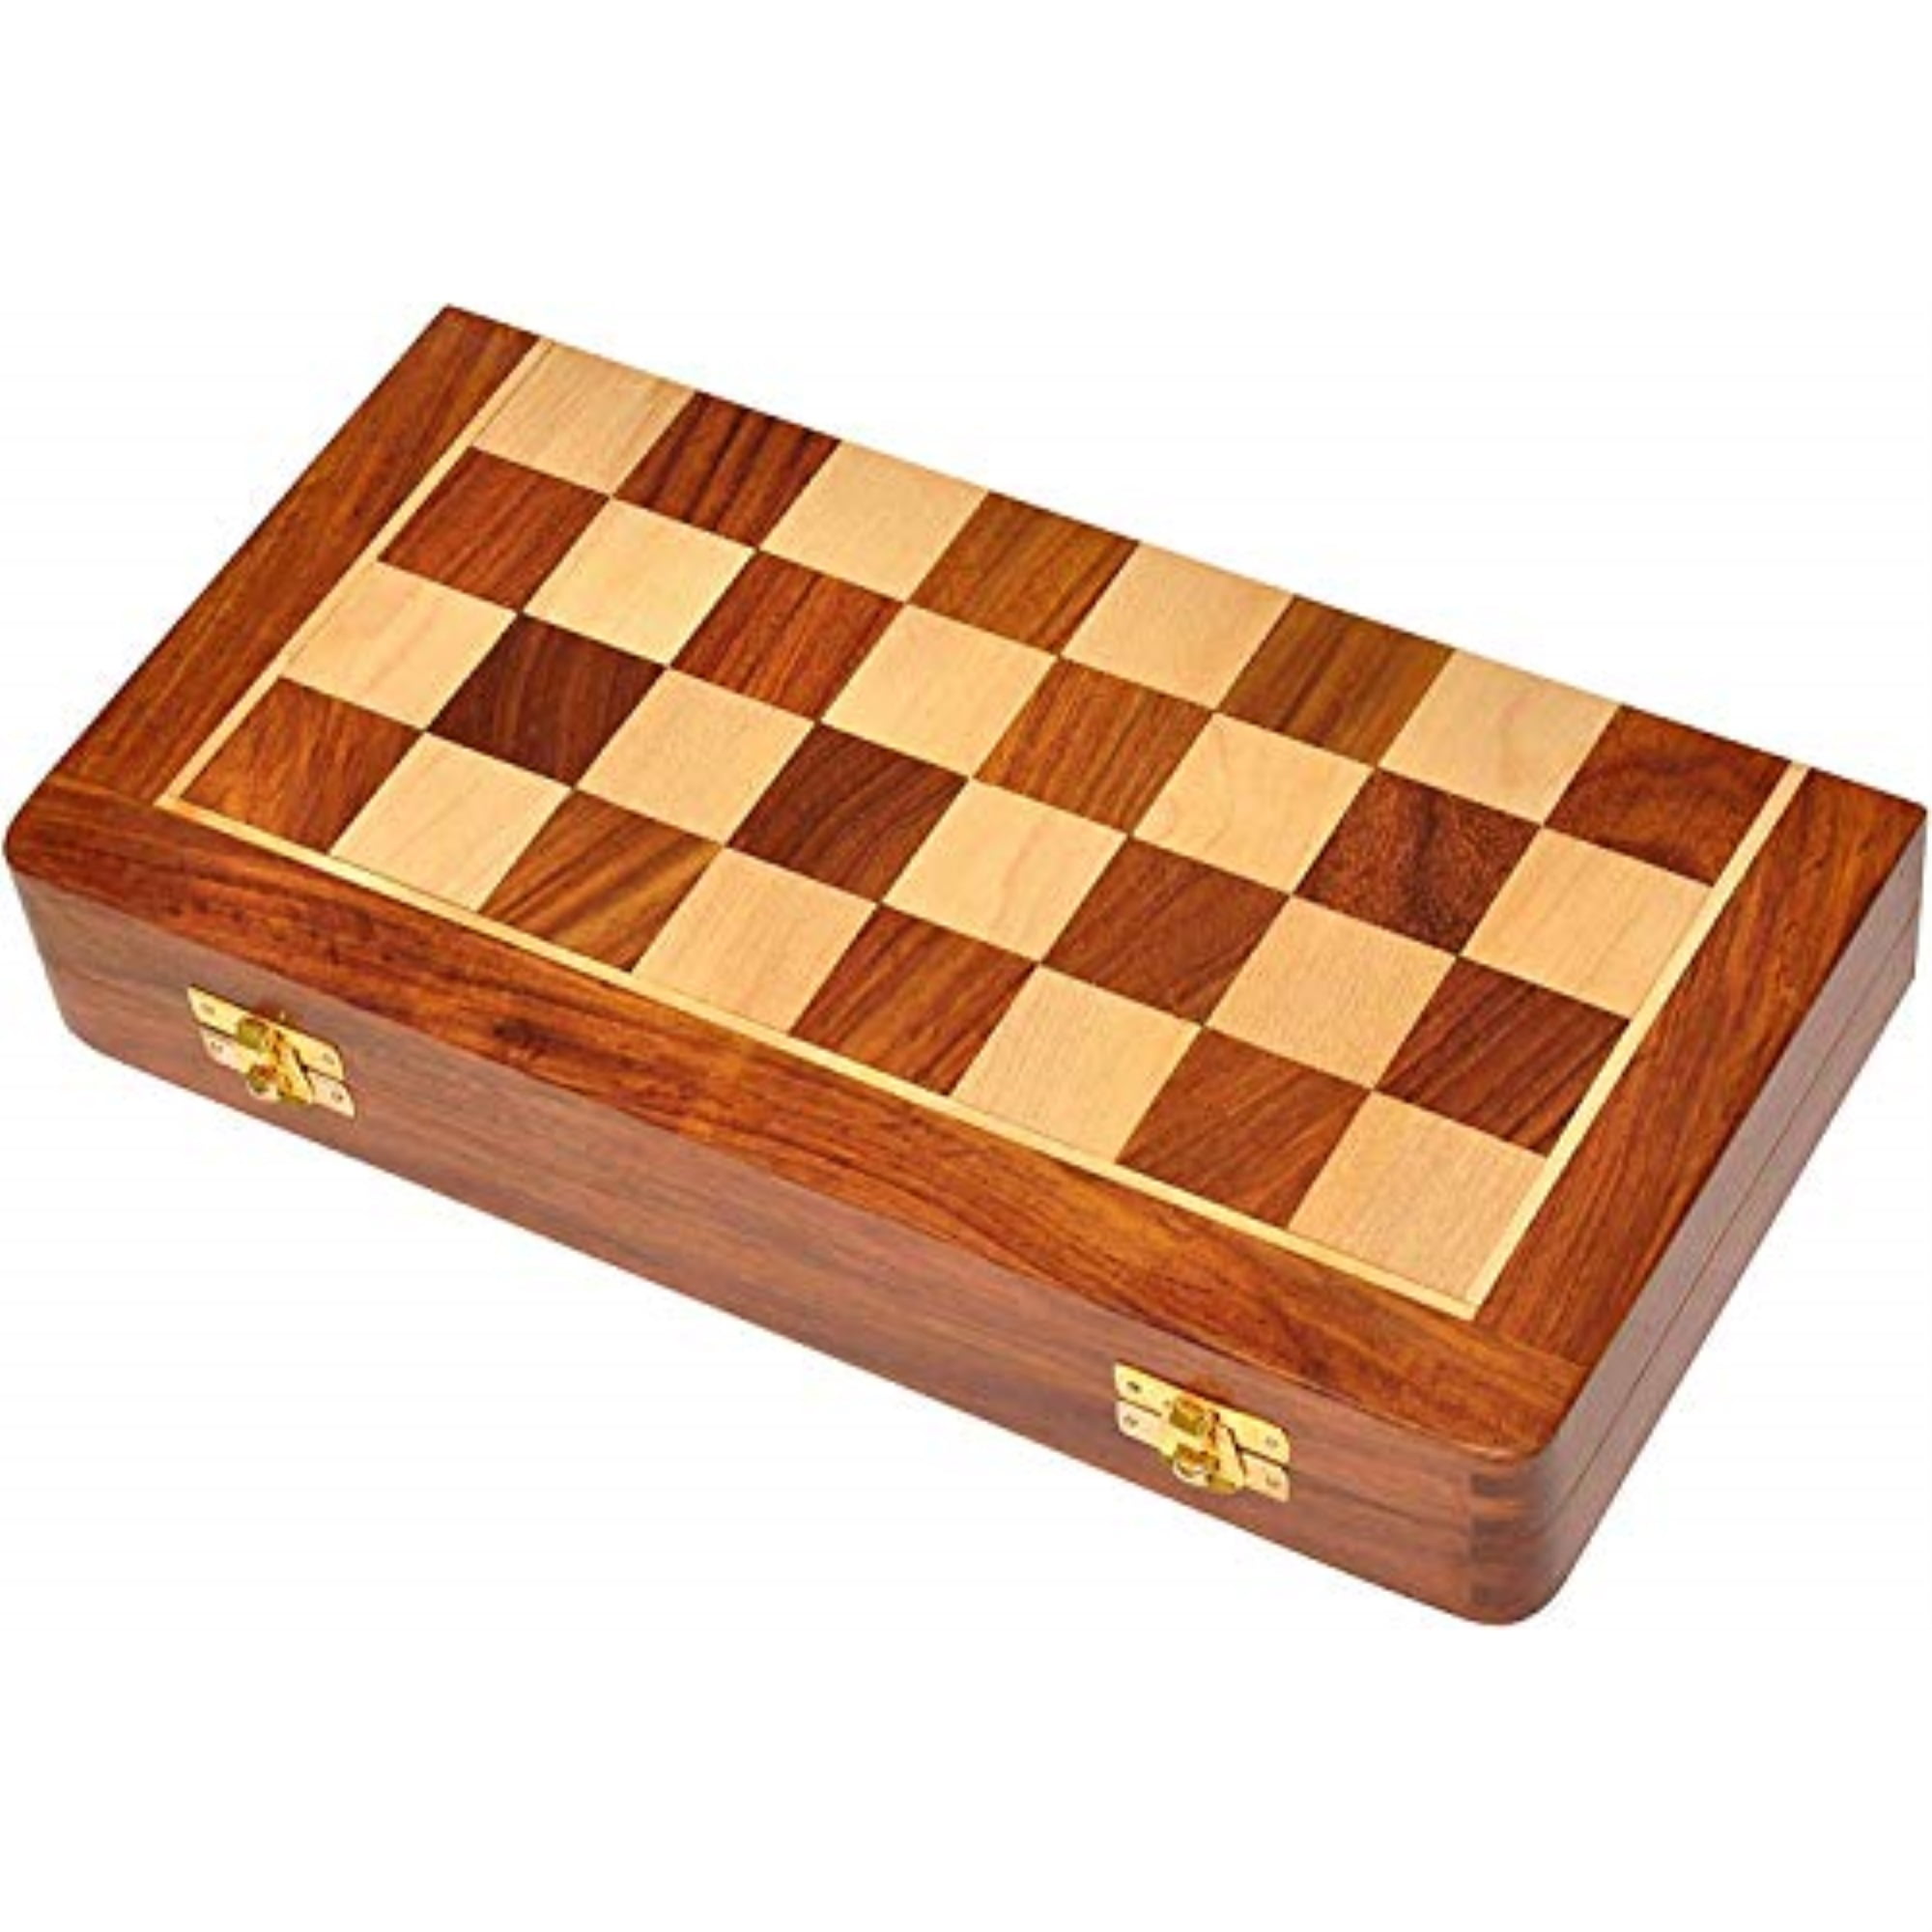 Chess Board Wooden Handcrafted Travelling Folding Magnetic Chess 12 X 12 Inches 